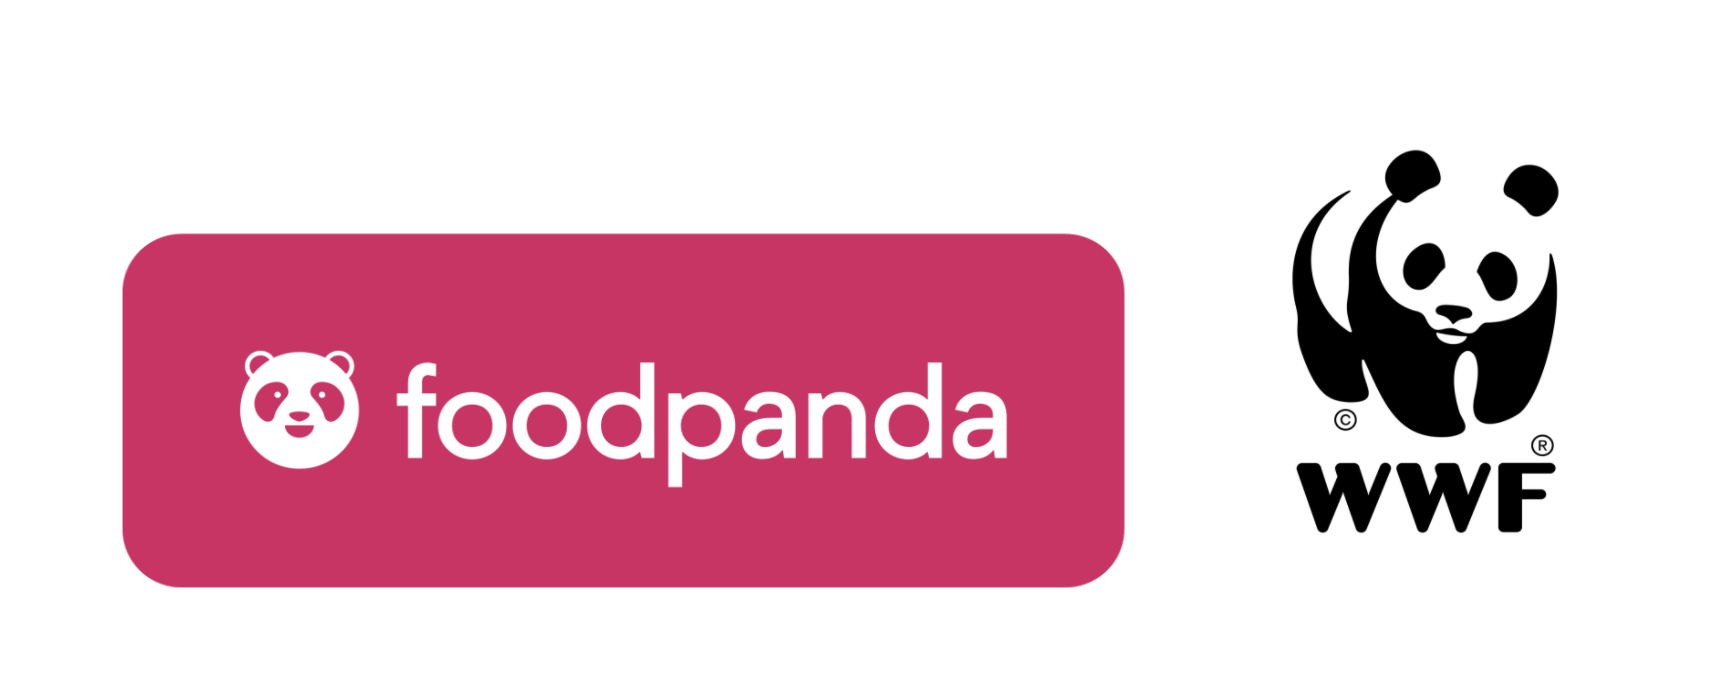 foodpanda Hong Kong launches “Sustainable Restaurant Certification Scheme” Incentivising Restaurants to Go Green